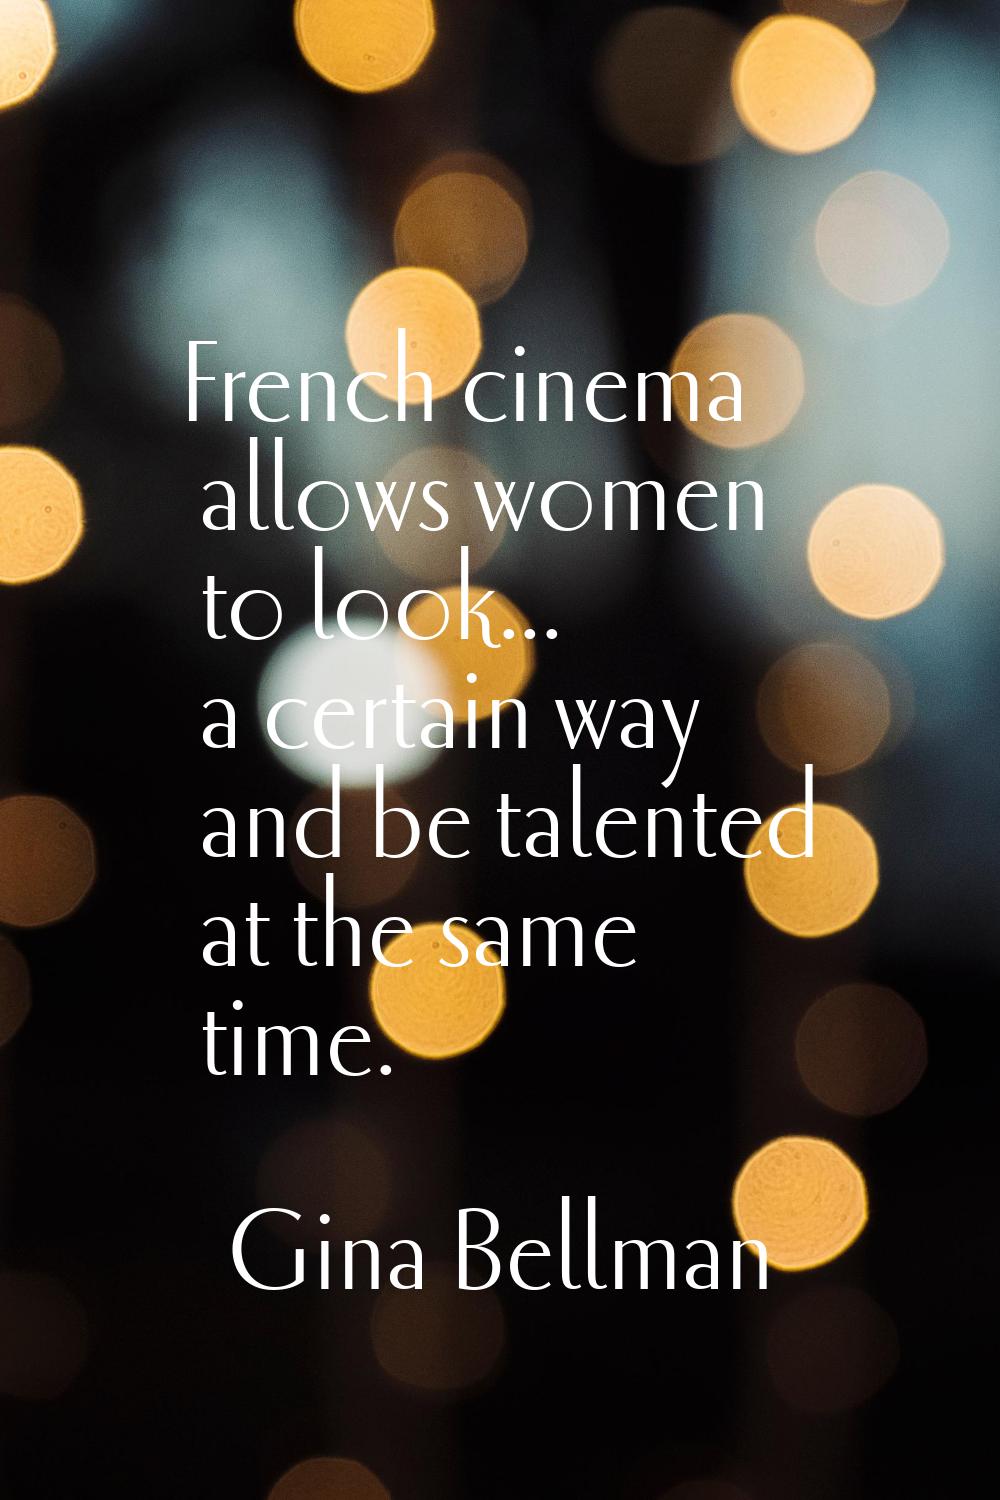 French cinema allows women to look... a certain way and be talented at the same time.